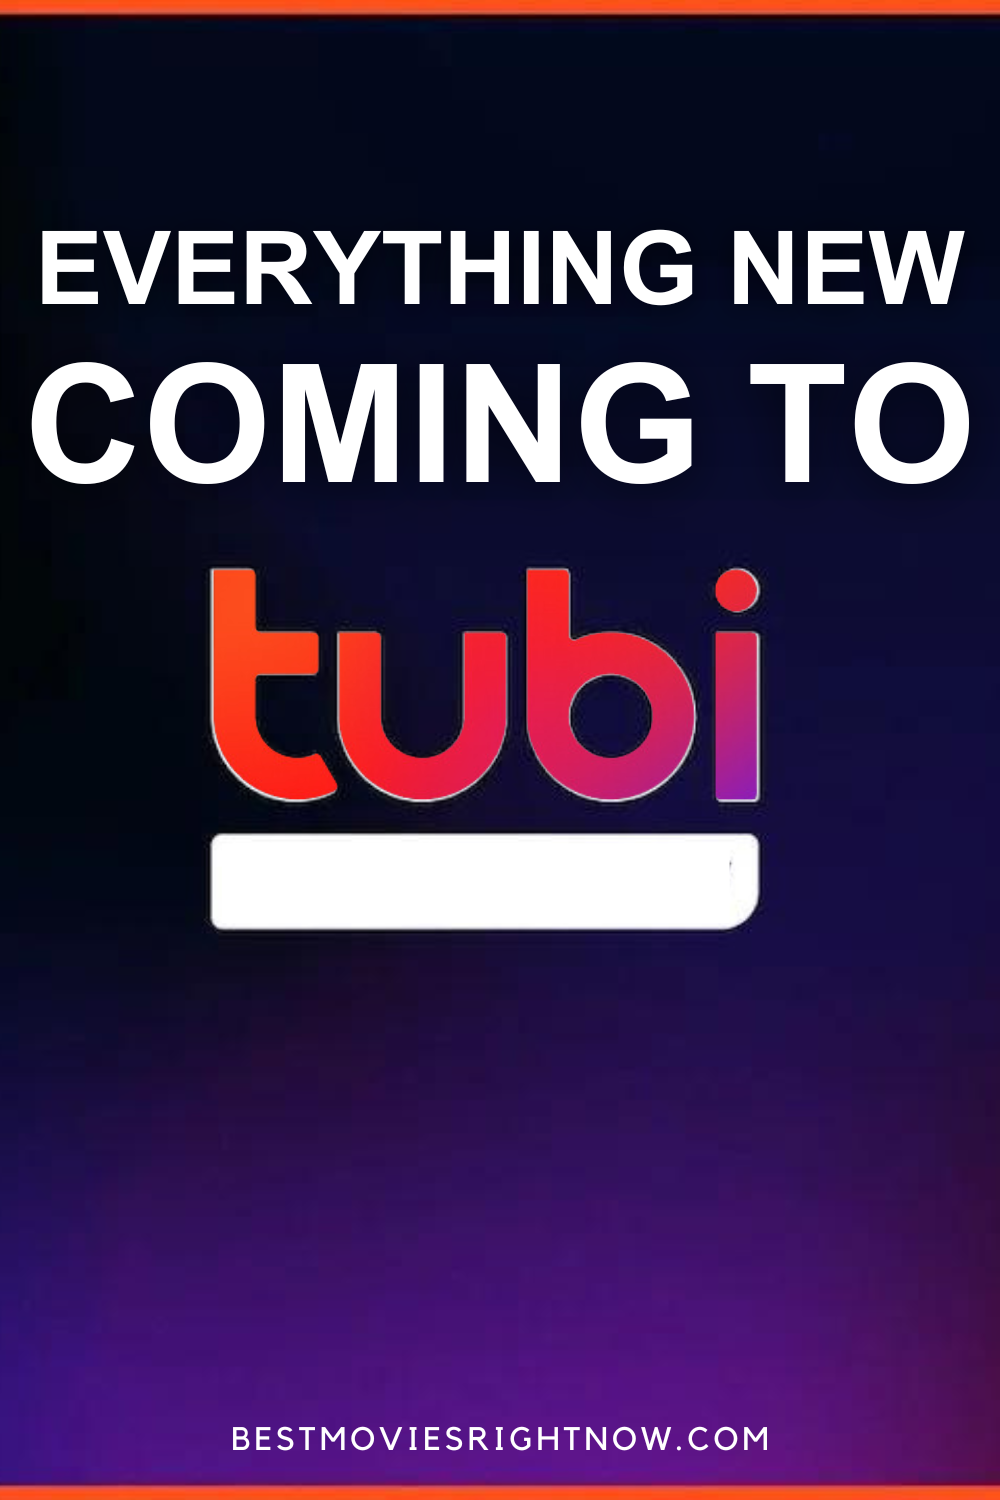 everything new coming to Tubi pin image with text overlay